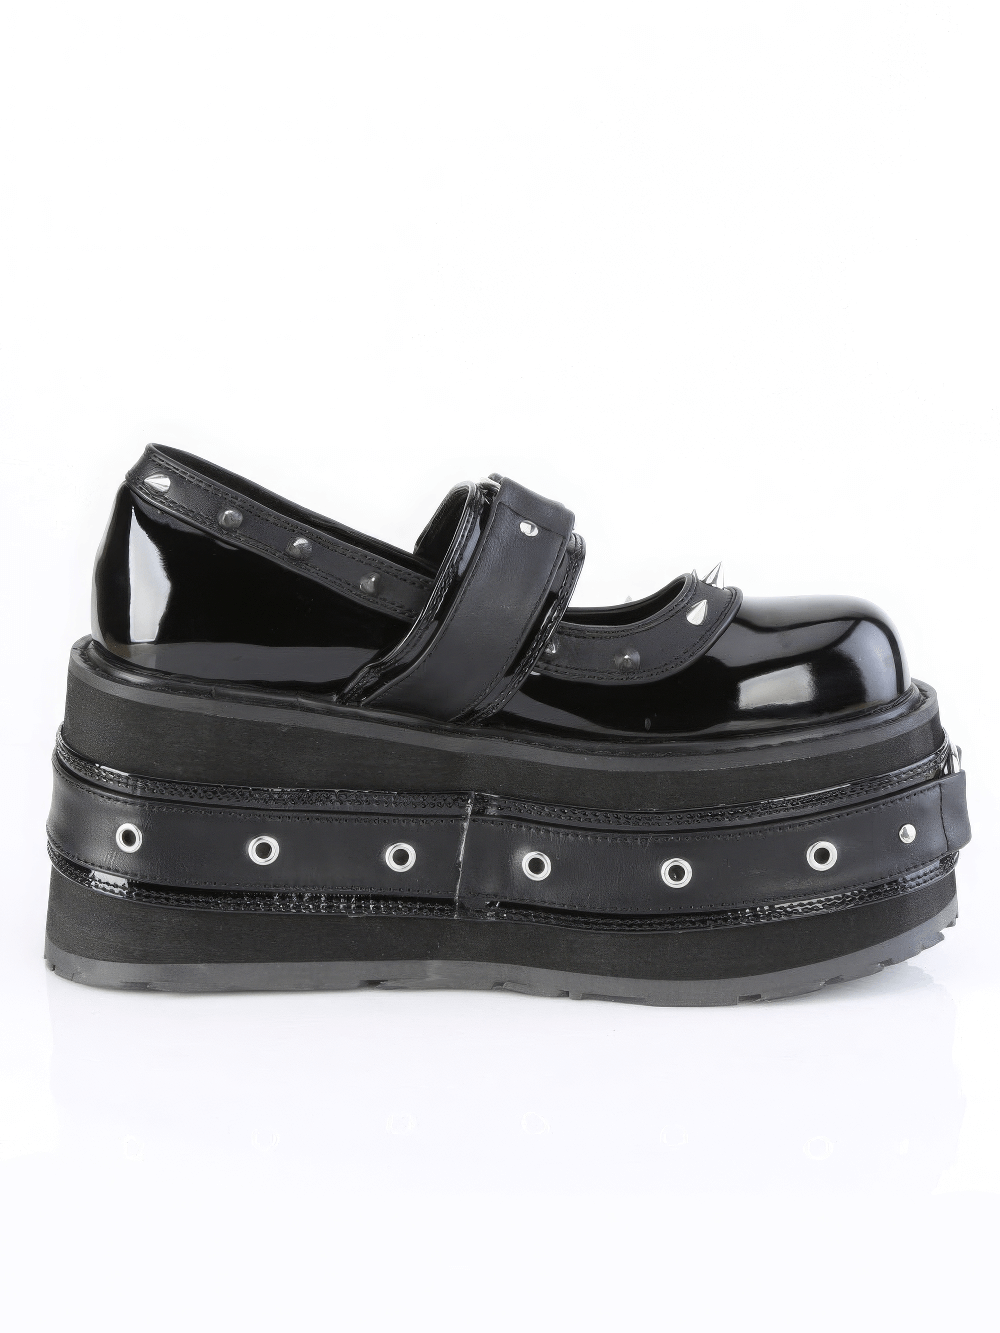 DEMONIA Spiked Platform Mary Jane with O-Ring Detail